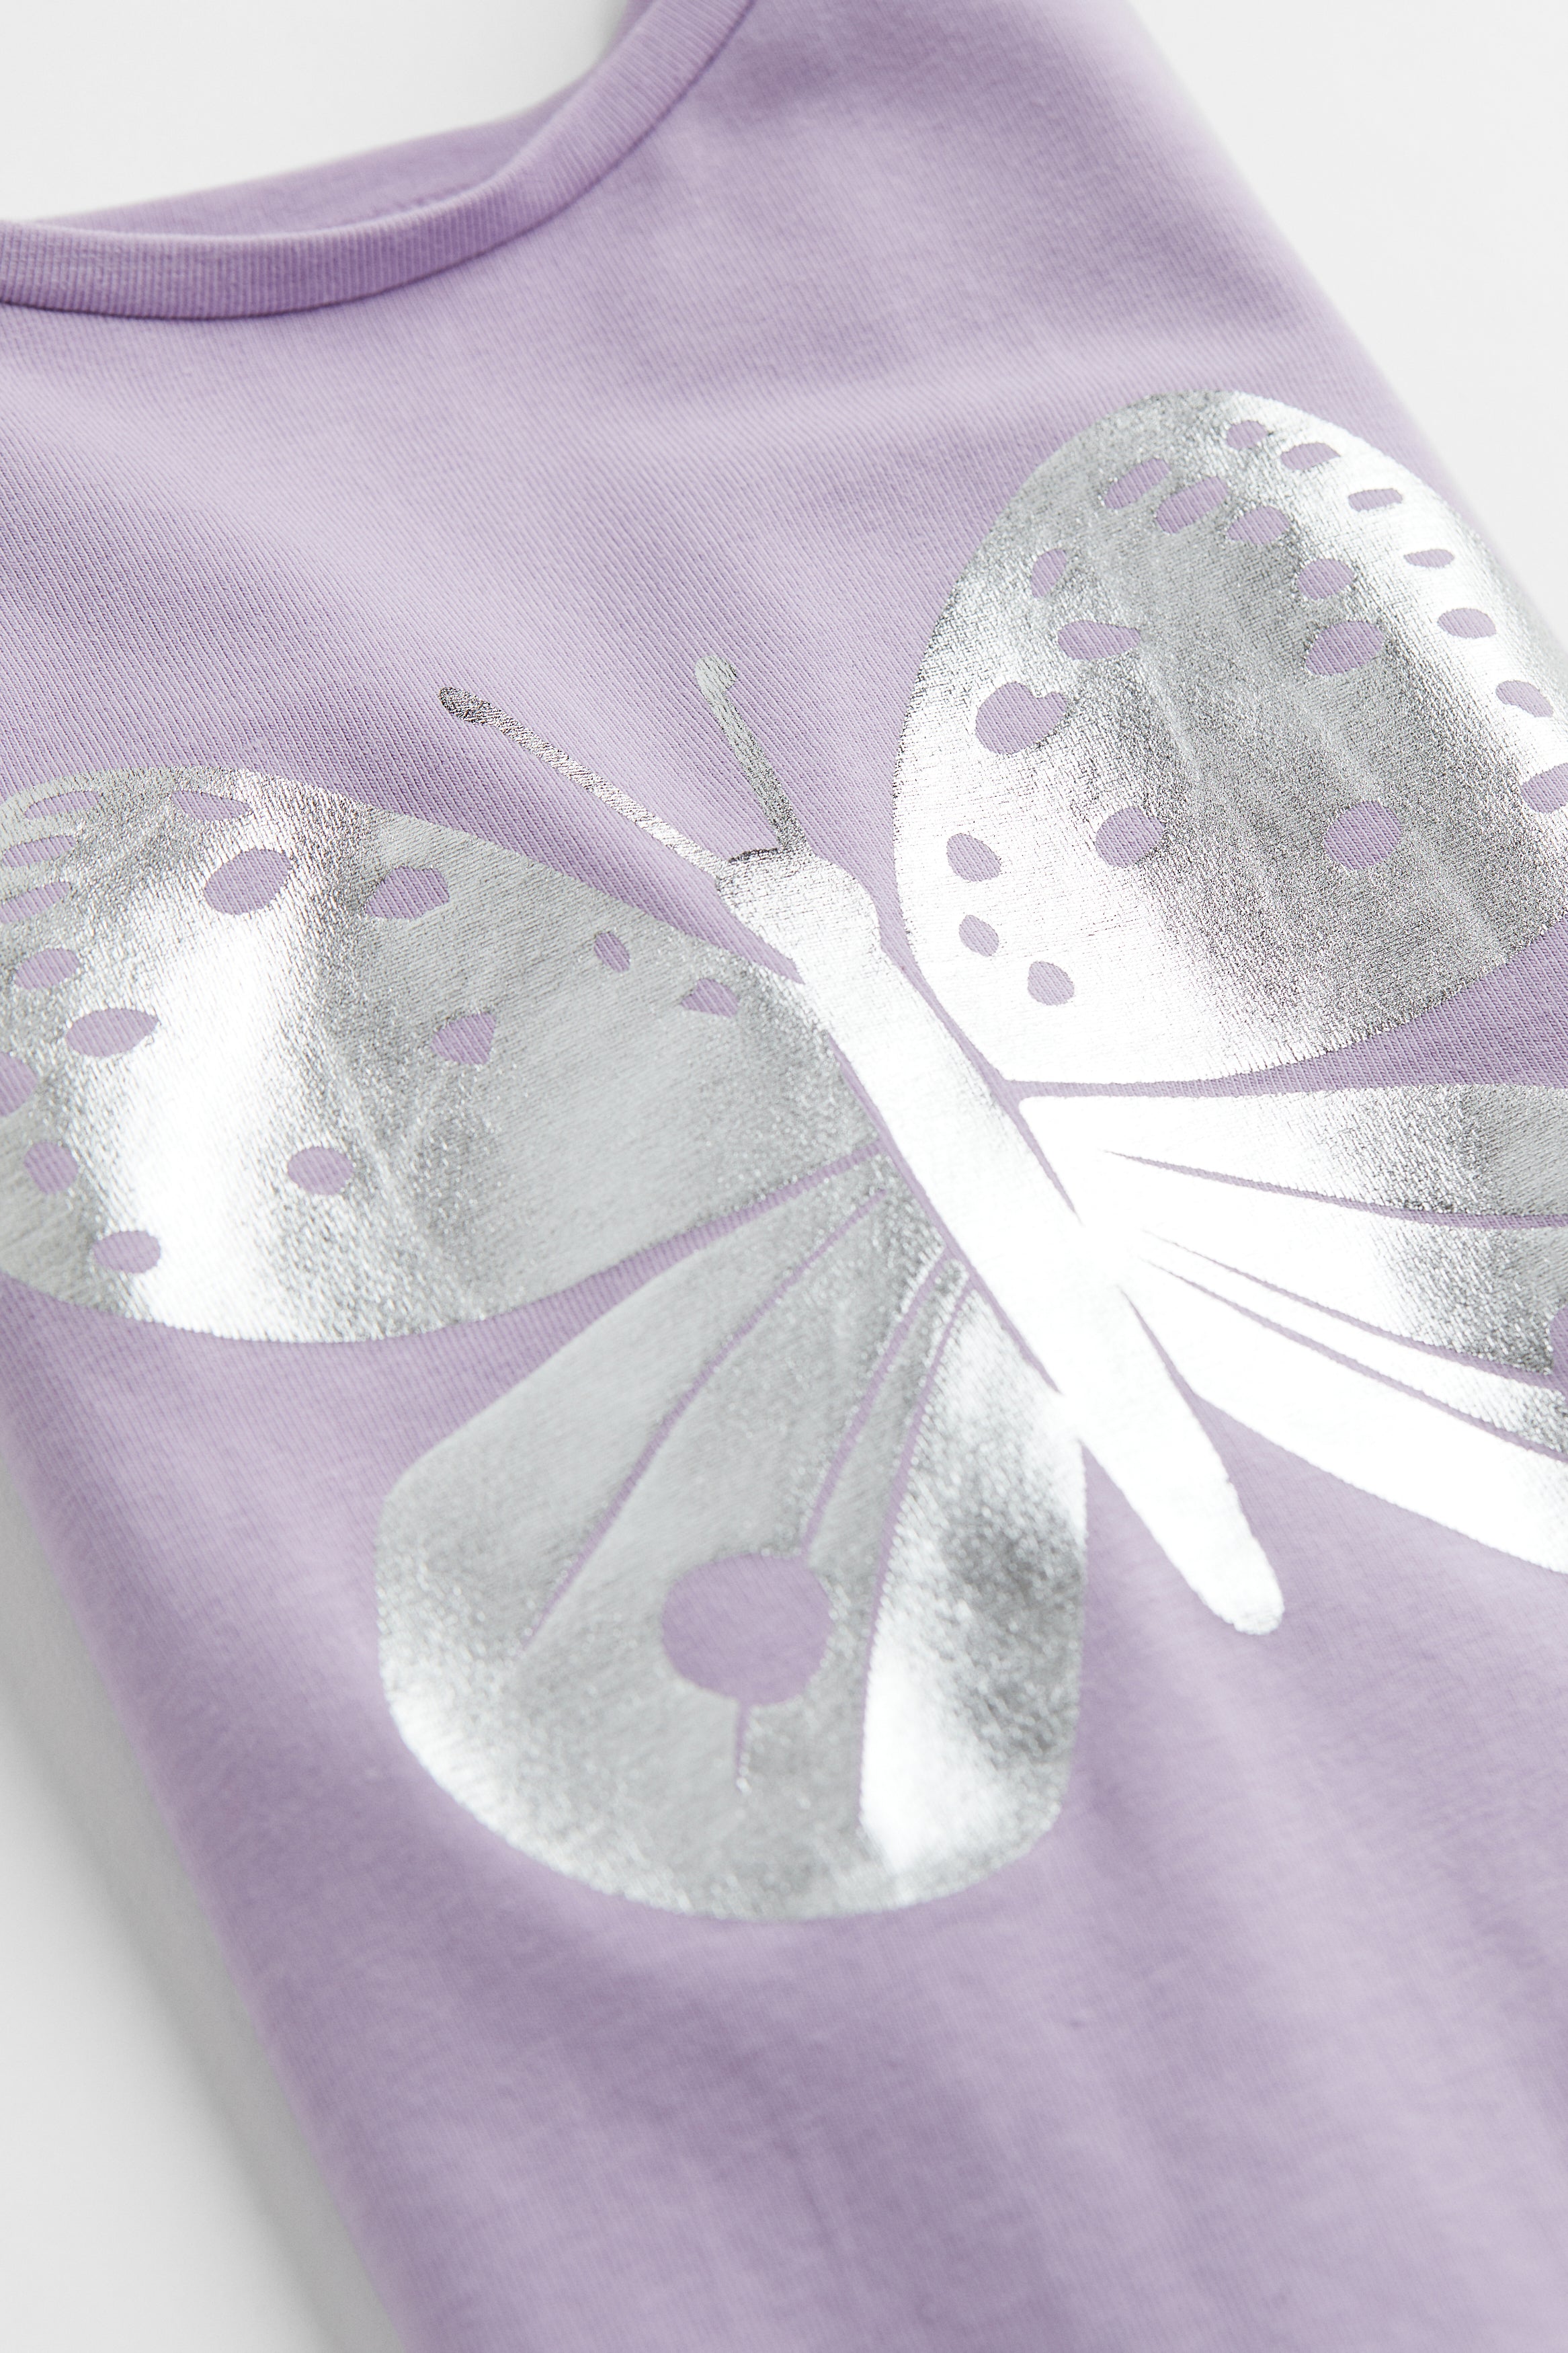 H&M Printed jersey top-Lilac Butterfly